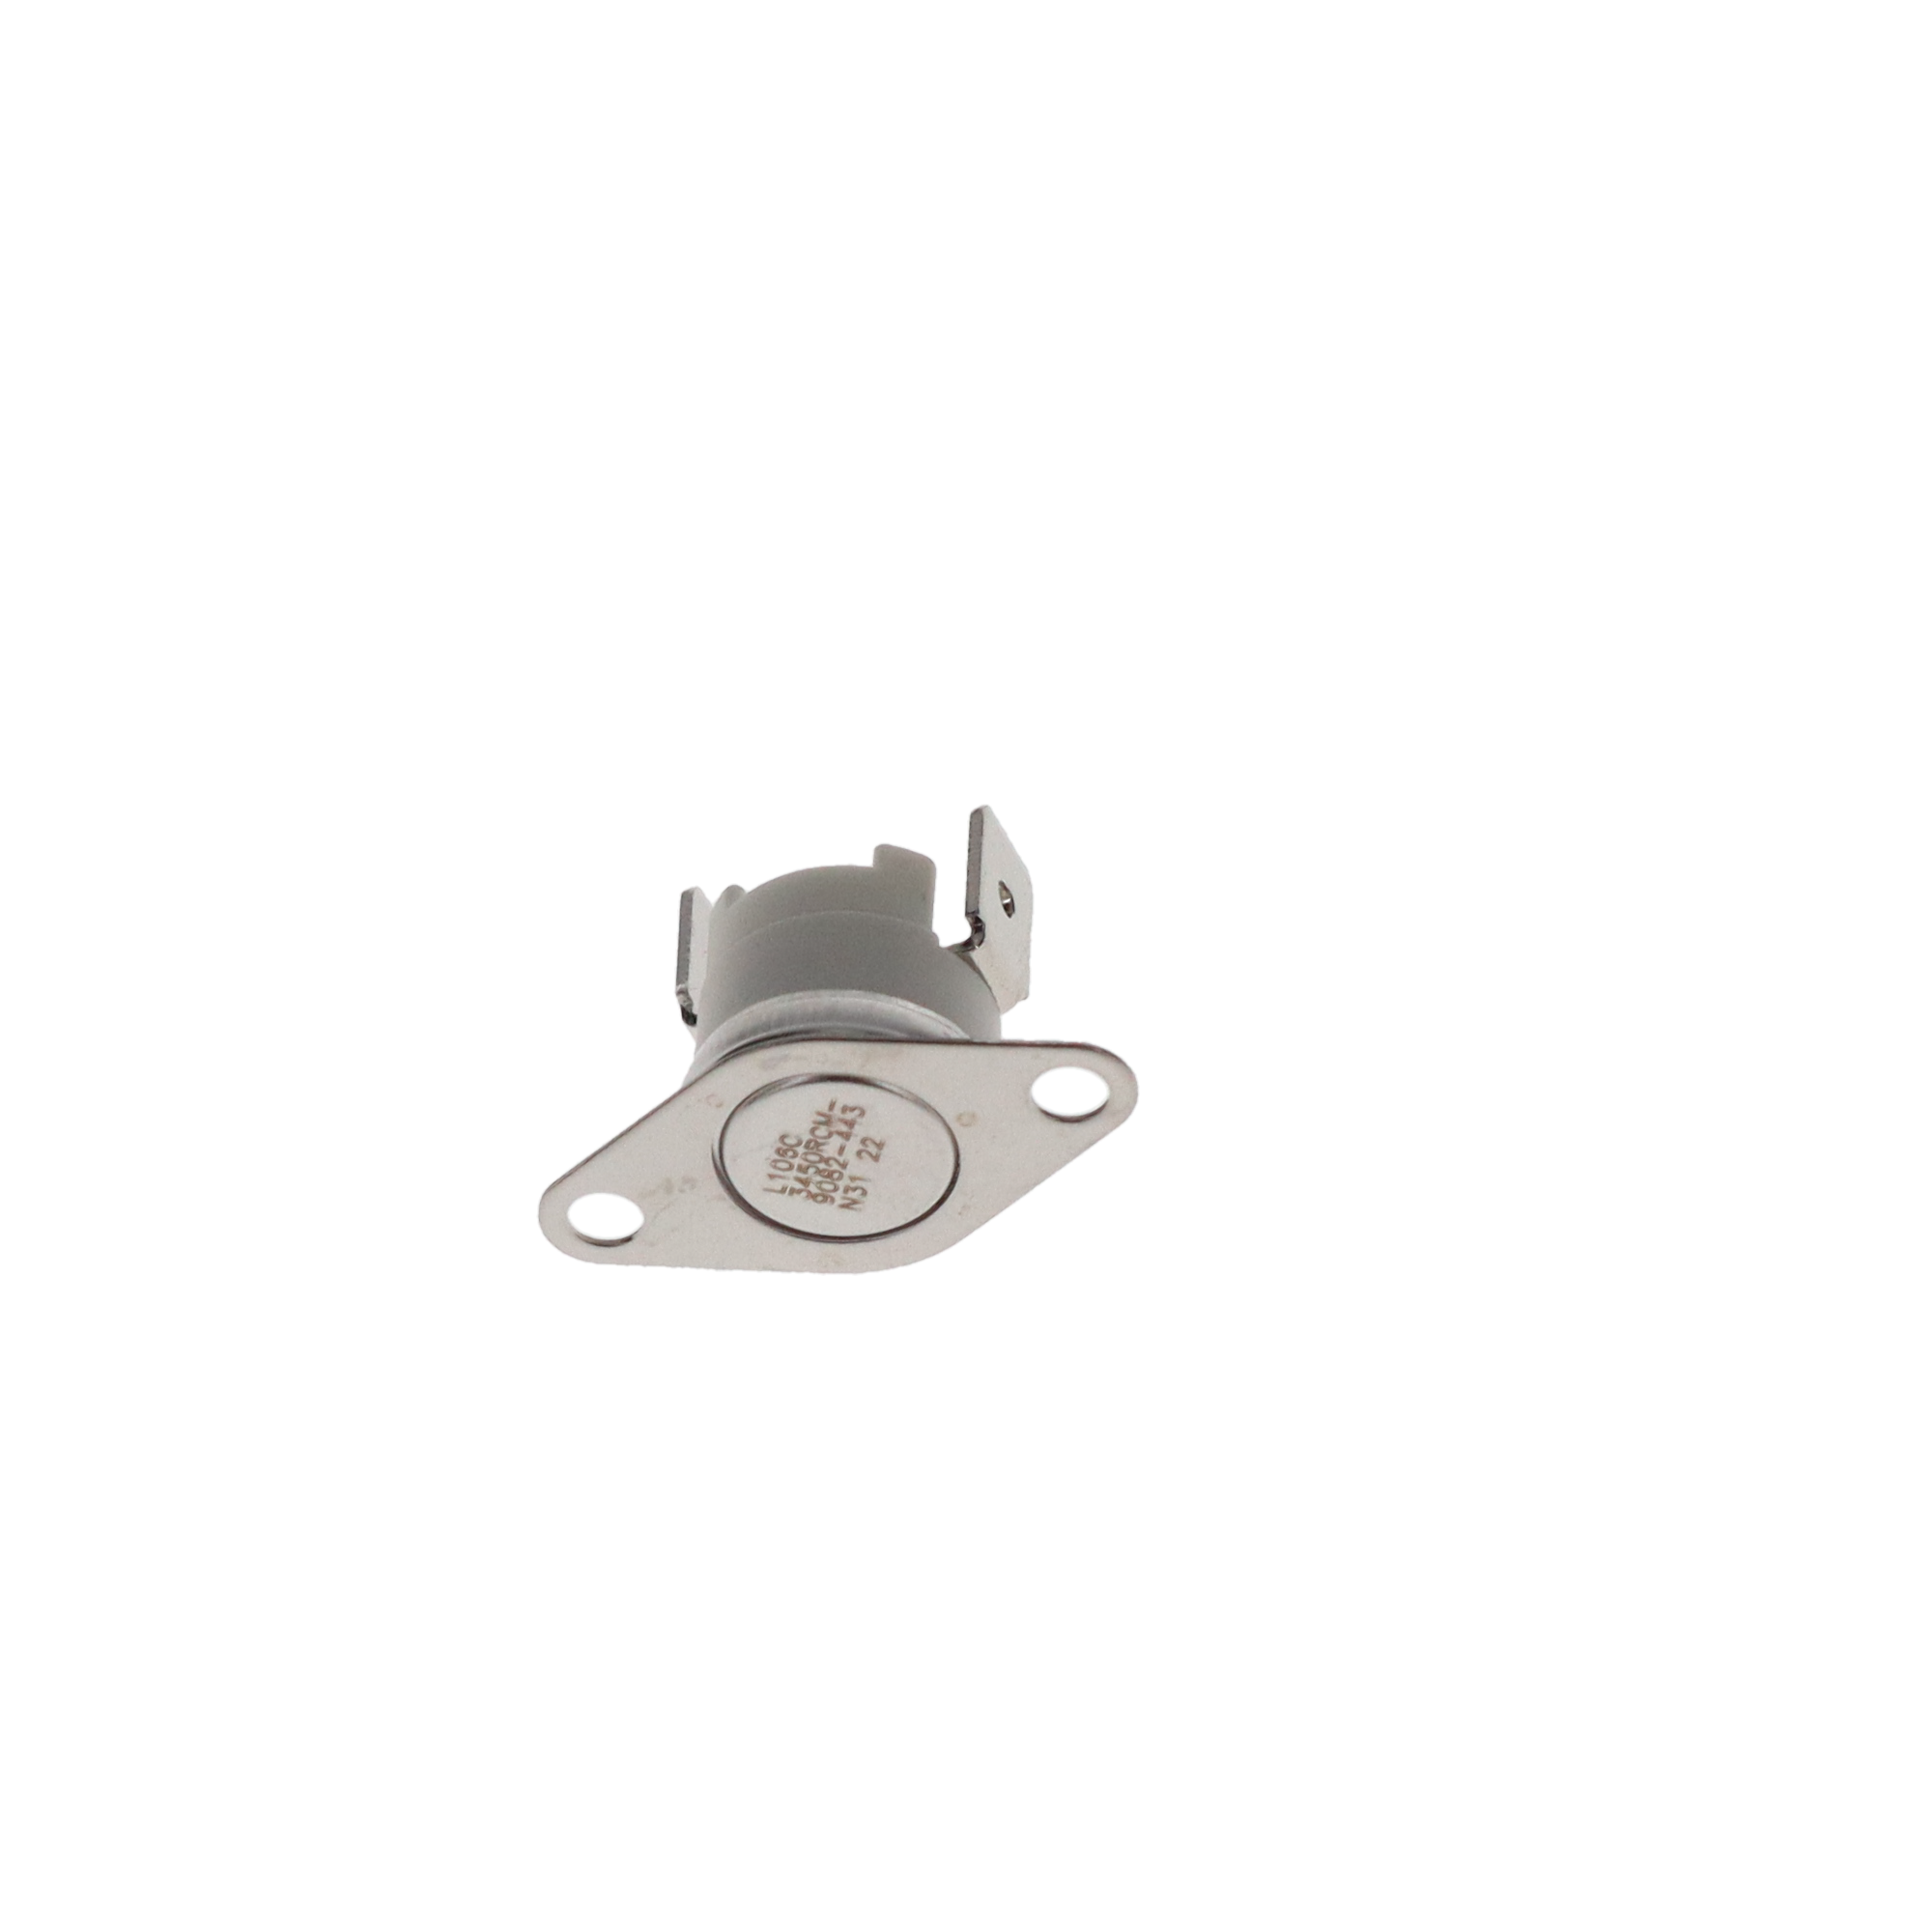 MK5/GS & RS Thermostat